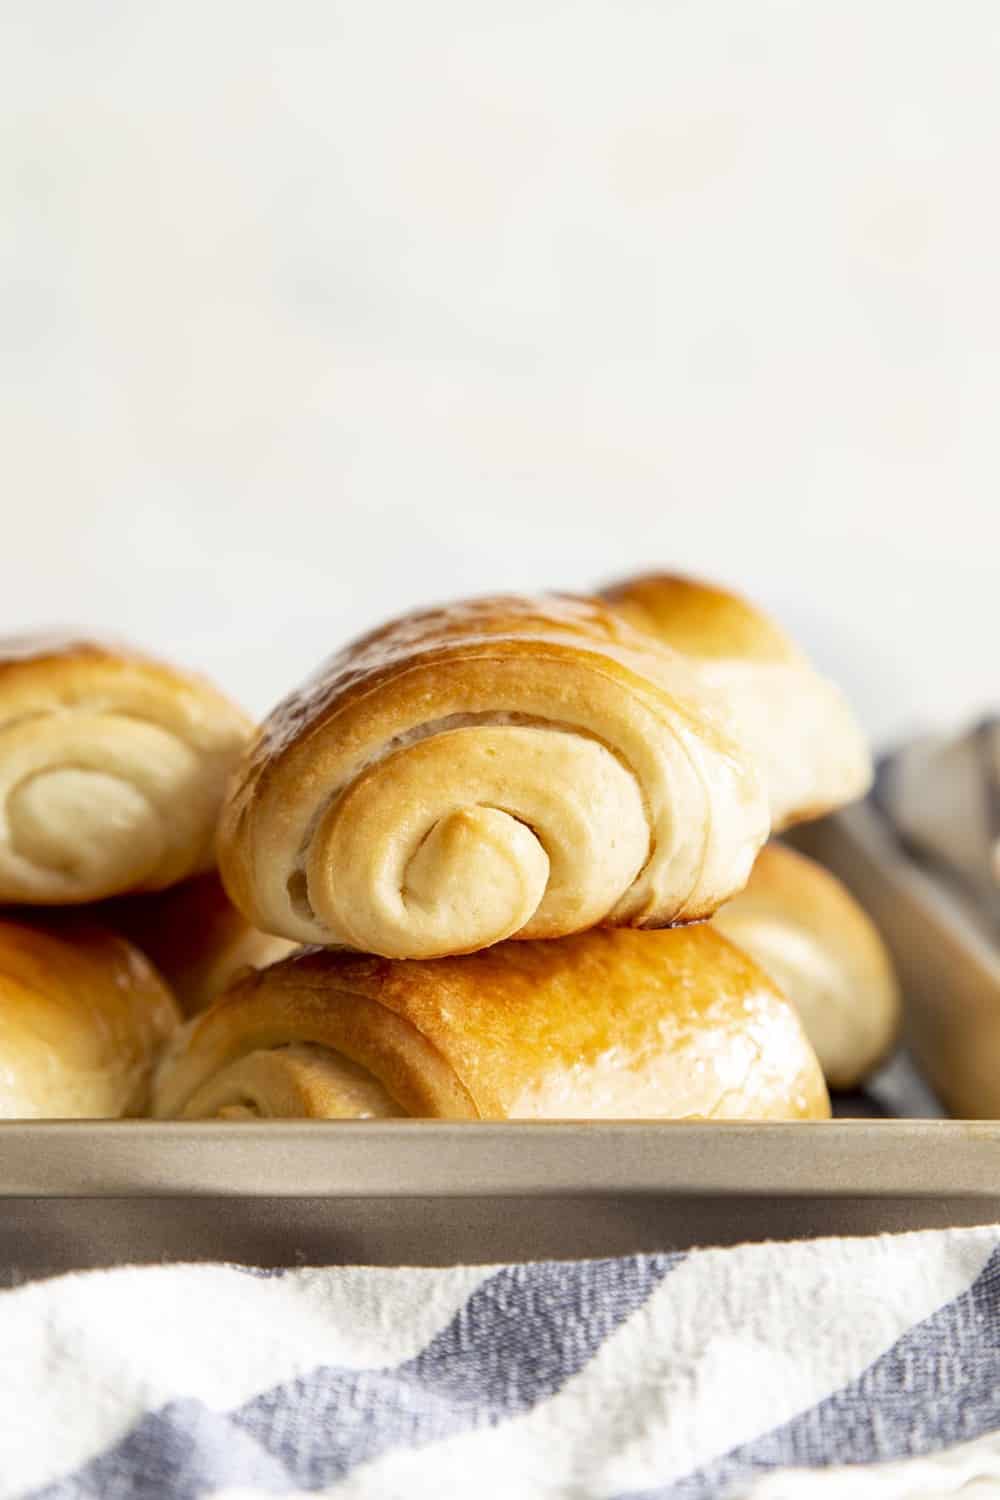 Stack of 2 lion house rolls